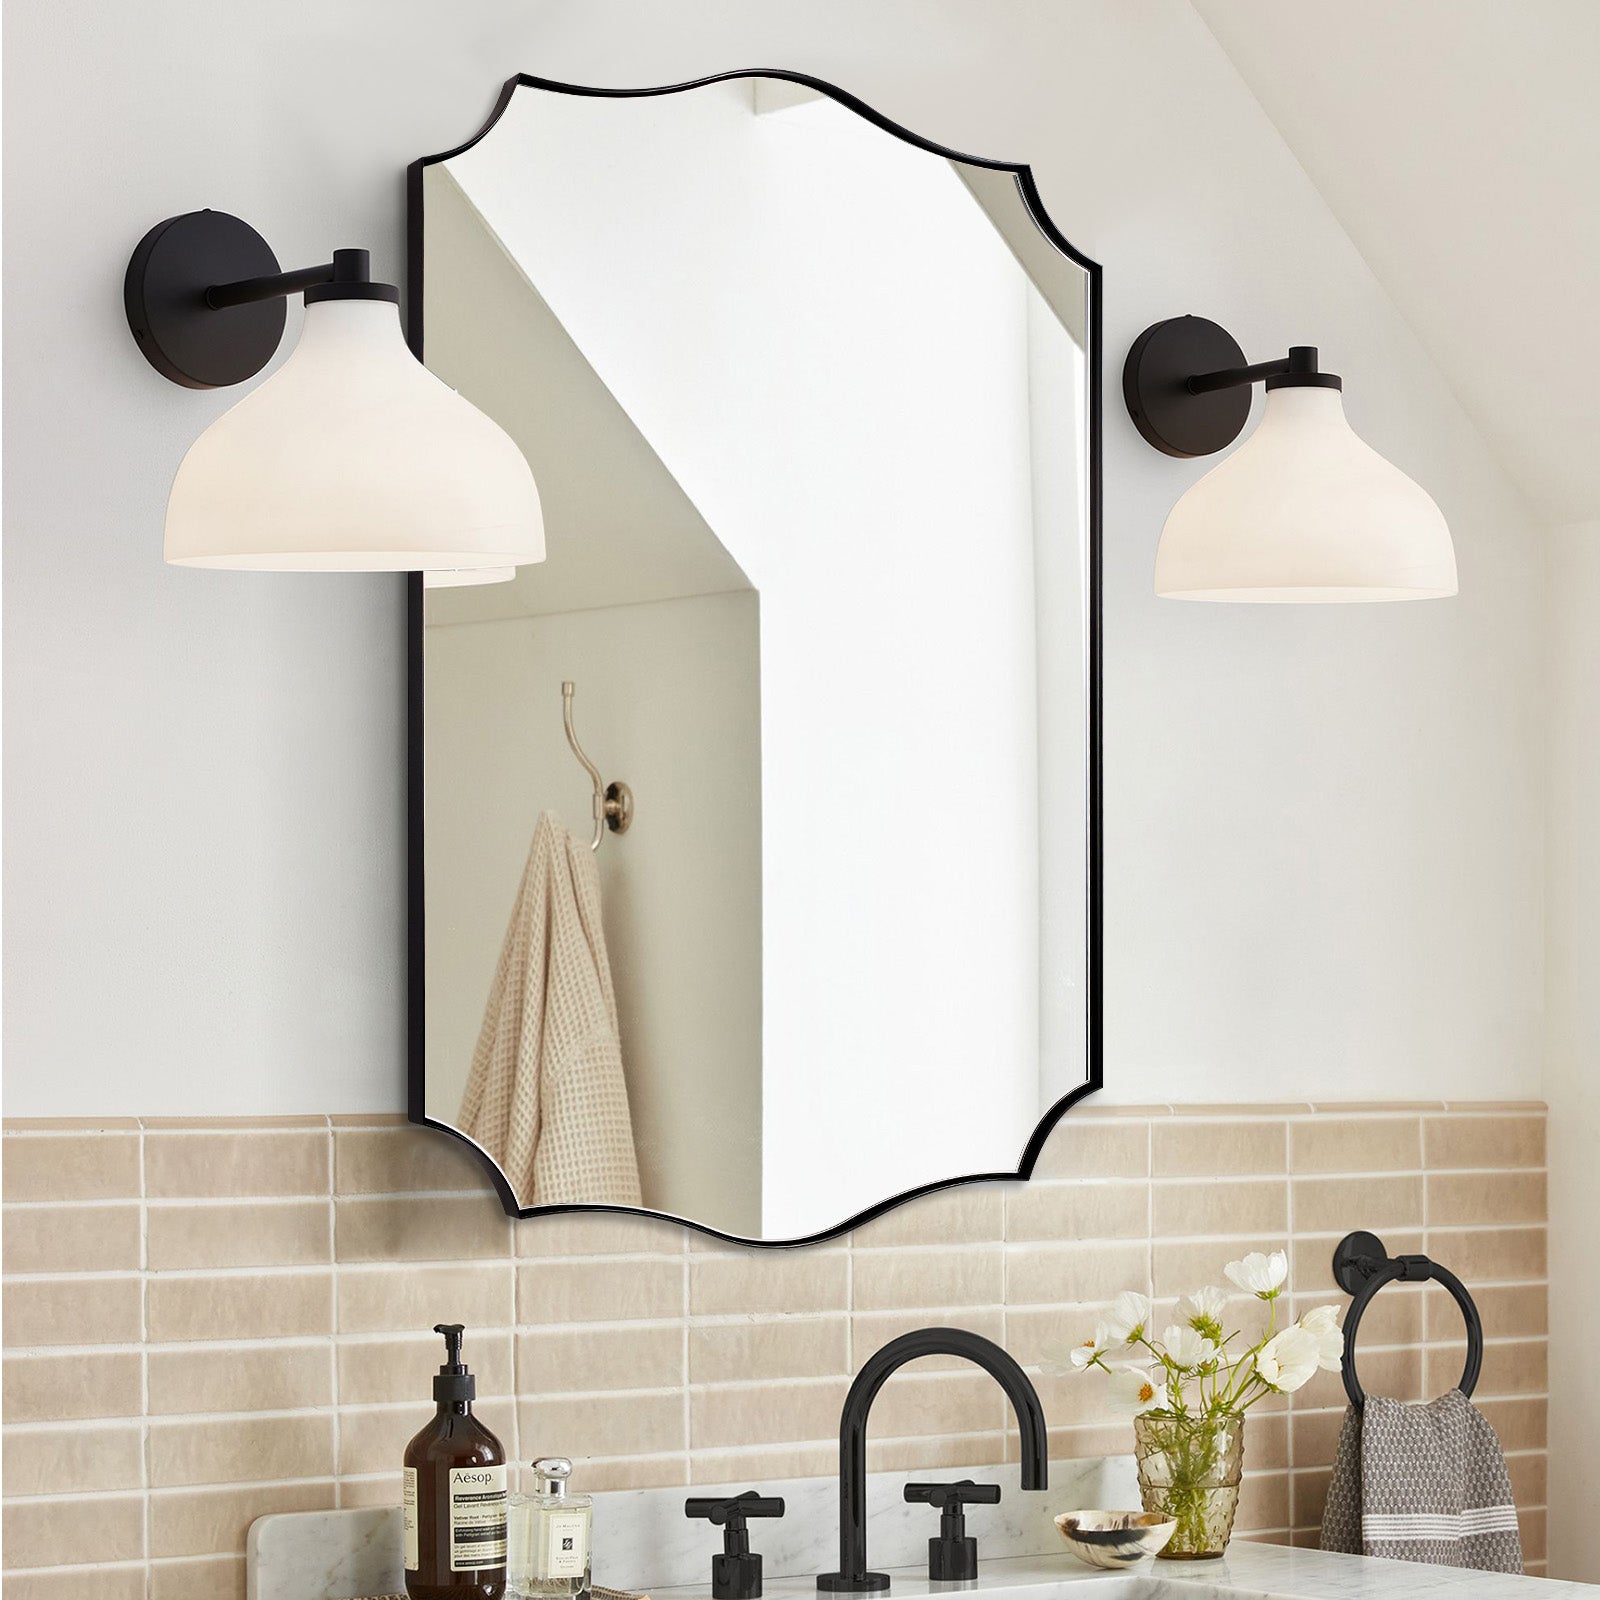 Traditional Scalloped Rectangle Wall Mirrors | Decorative Metal Frame